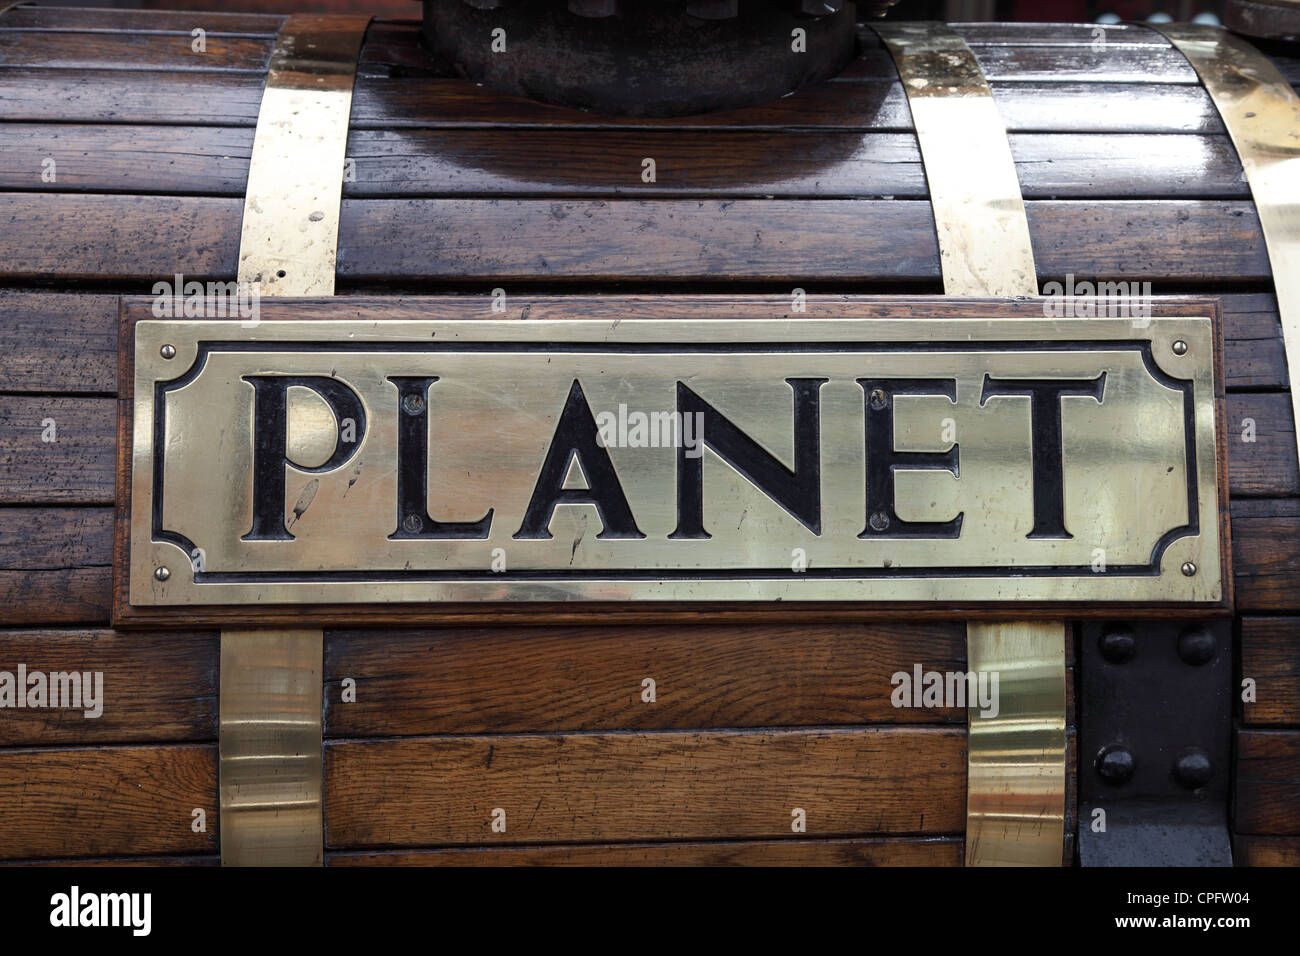 Nameplate of Replica Victorian steam locomotive Planet - Manchester Museum of Science & Industry Stock Photo